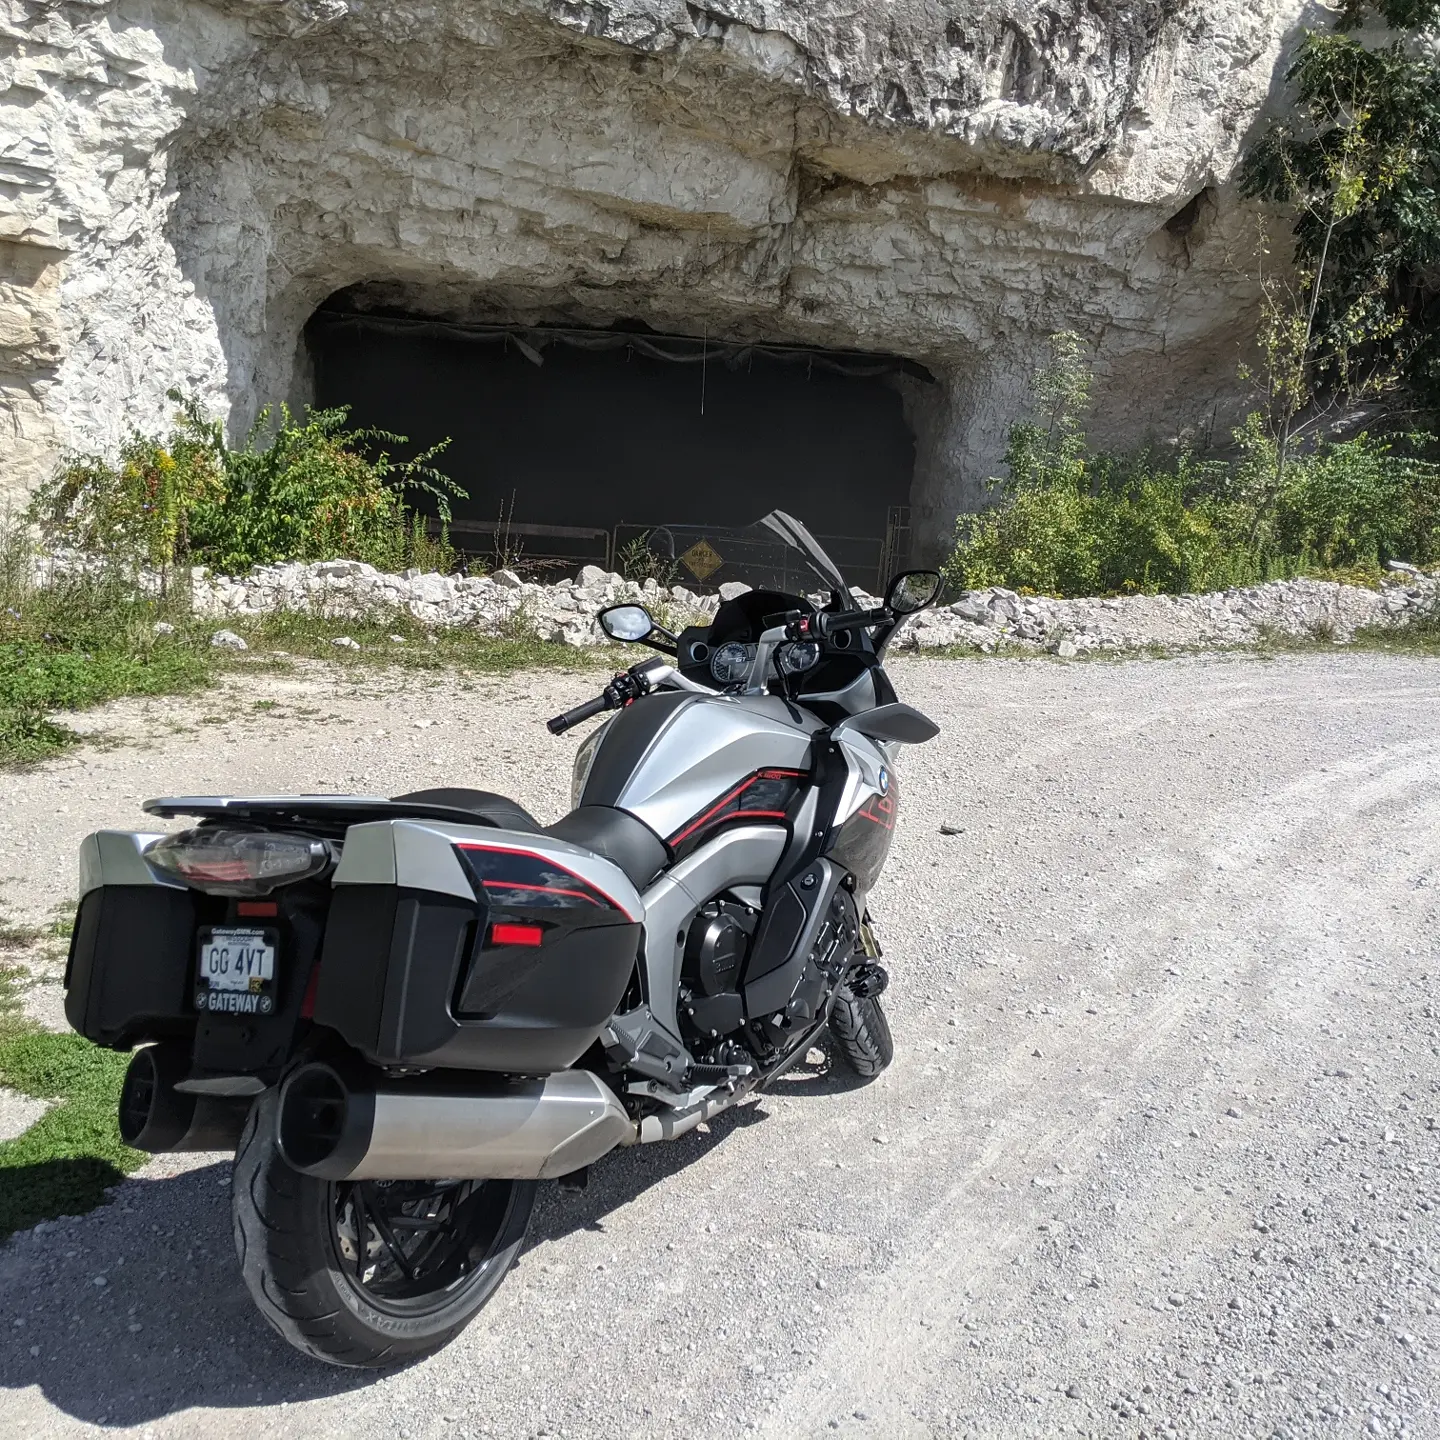 Fun tip; when riding down Bluff Road south of Valmeyer Illinois, you can stop right here and cool off. Ambient temperature was 91... I stood here in the 68 degree cool for a bit. #ridingtherapy #bmwmotorrad #ridingillinois